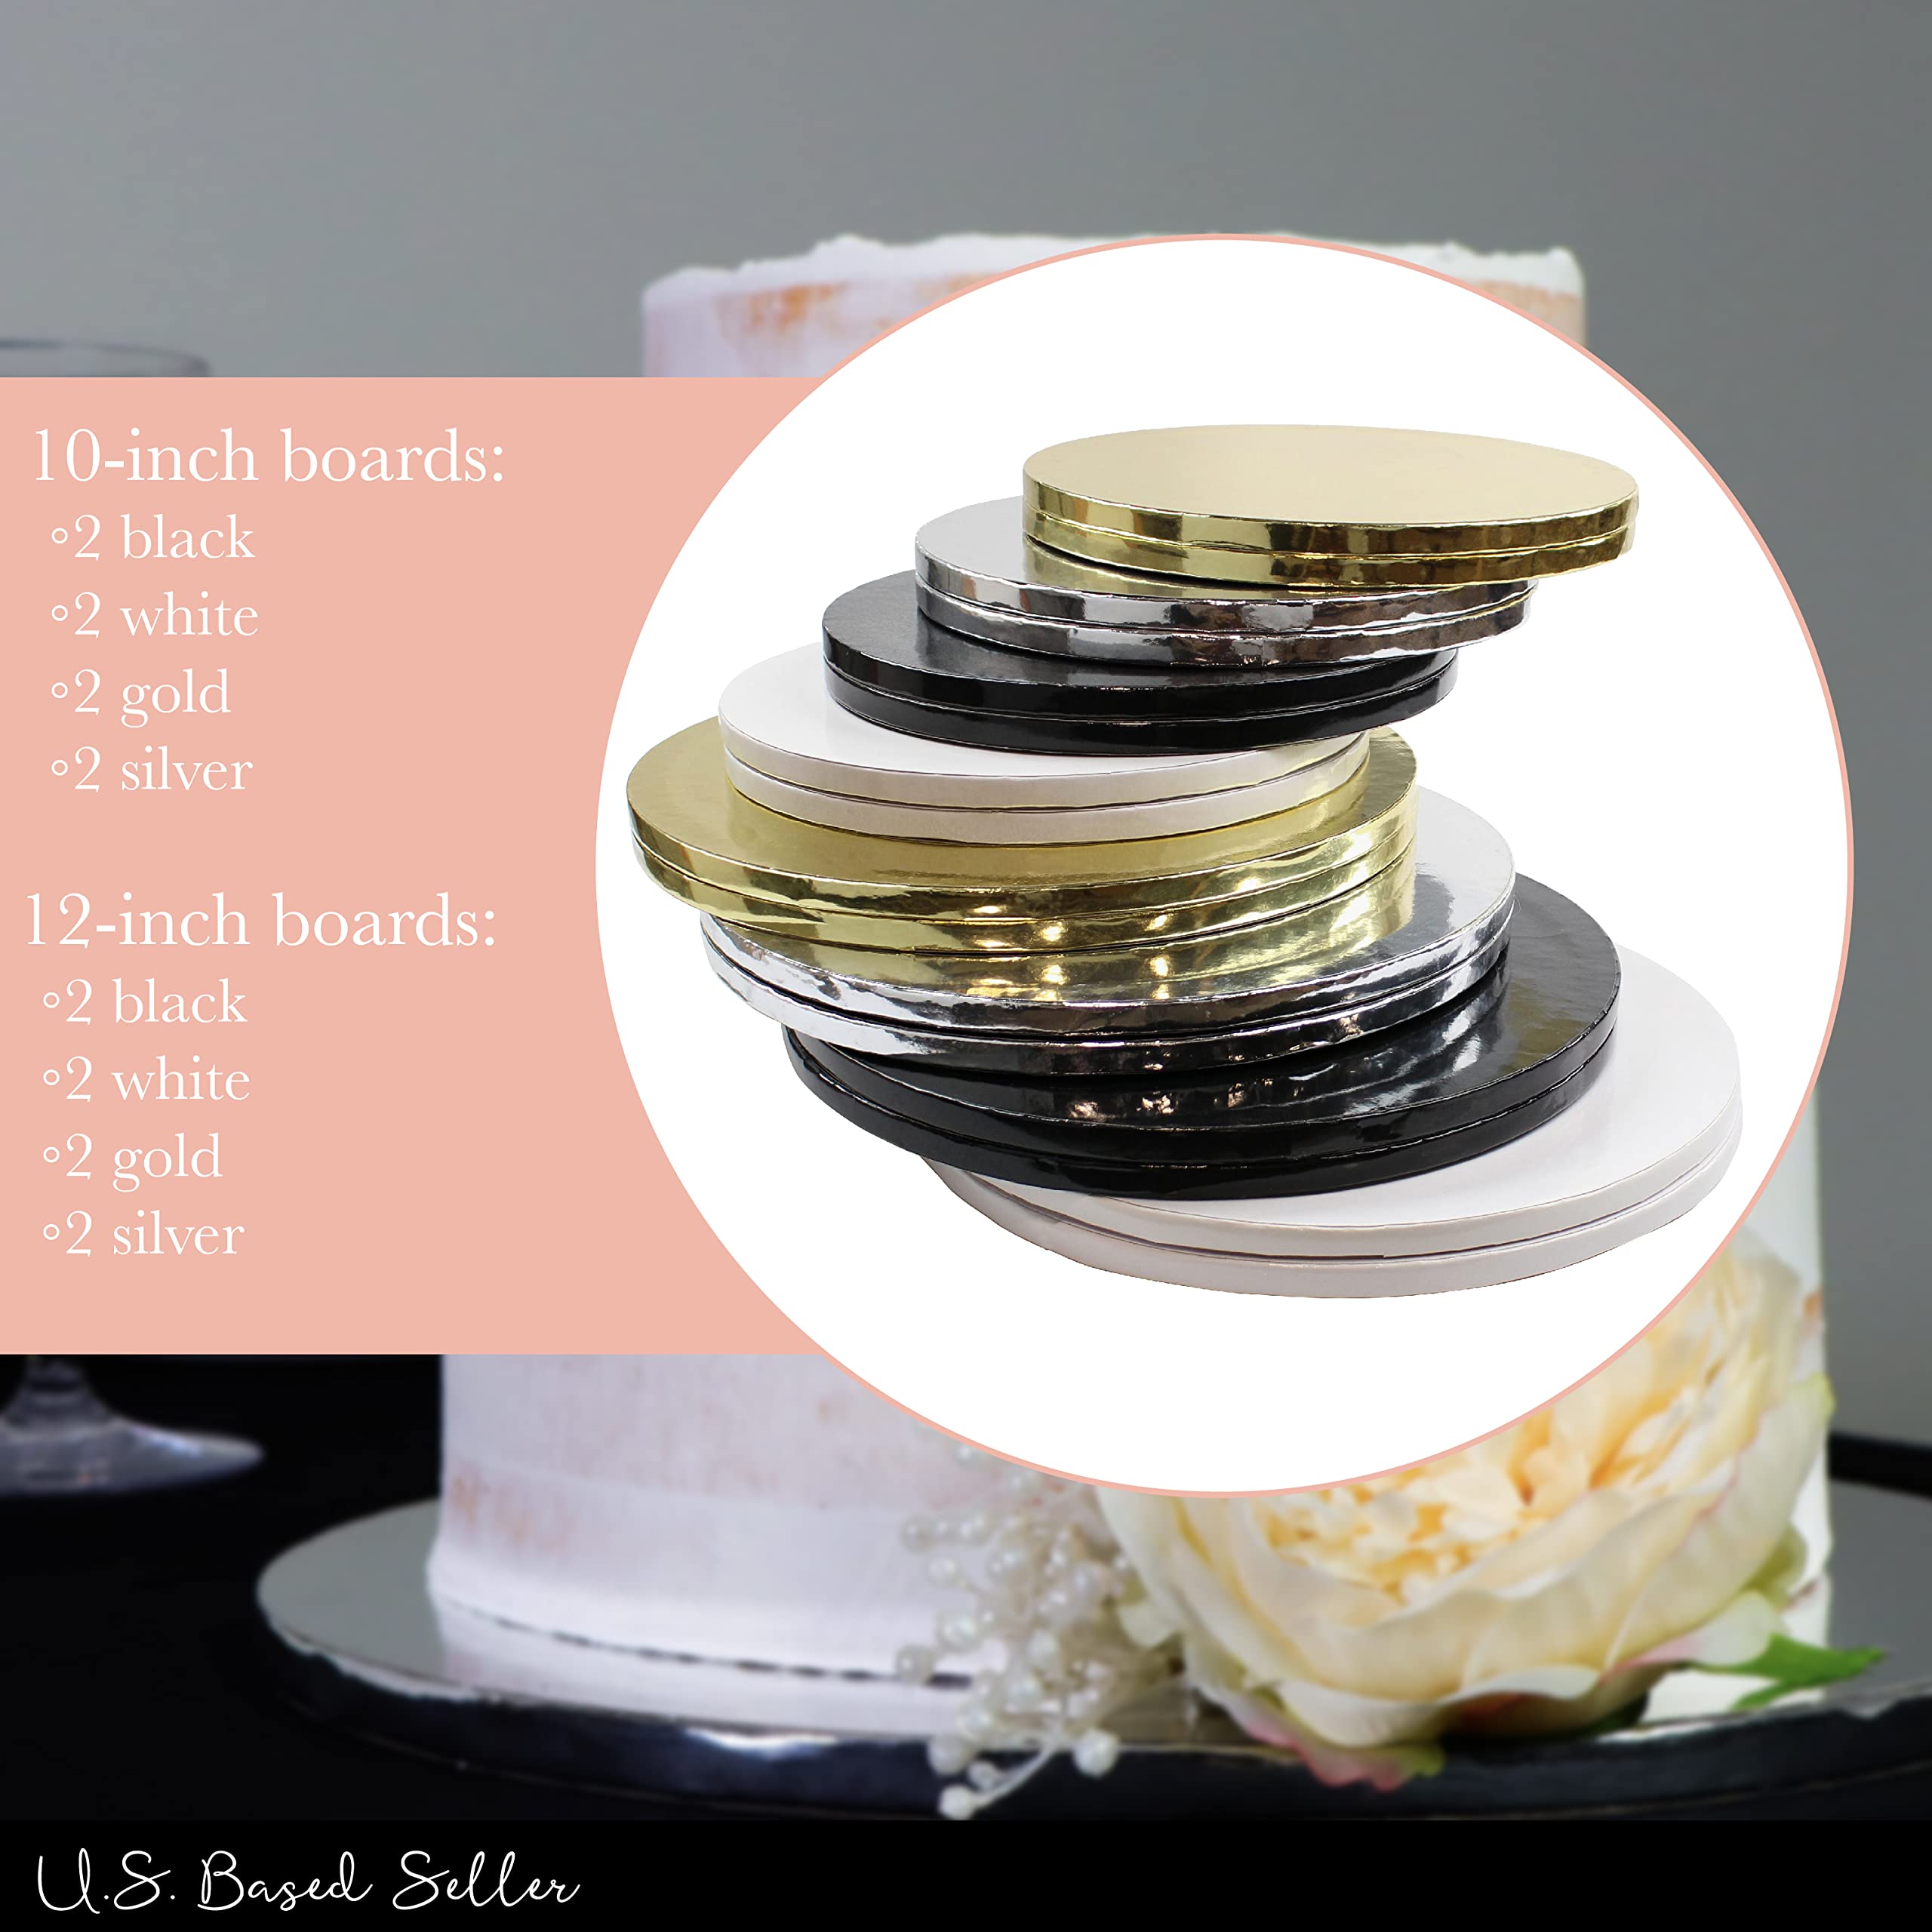 Spec101 Foil Cake Board Wrap Cake Bases - 16pk Gold Silver White Black Cake Drums 10 and 12 Inch Cake Boards